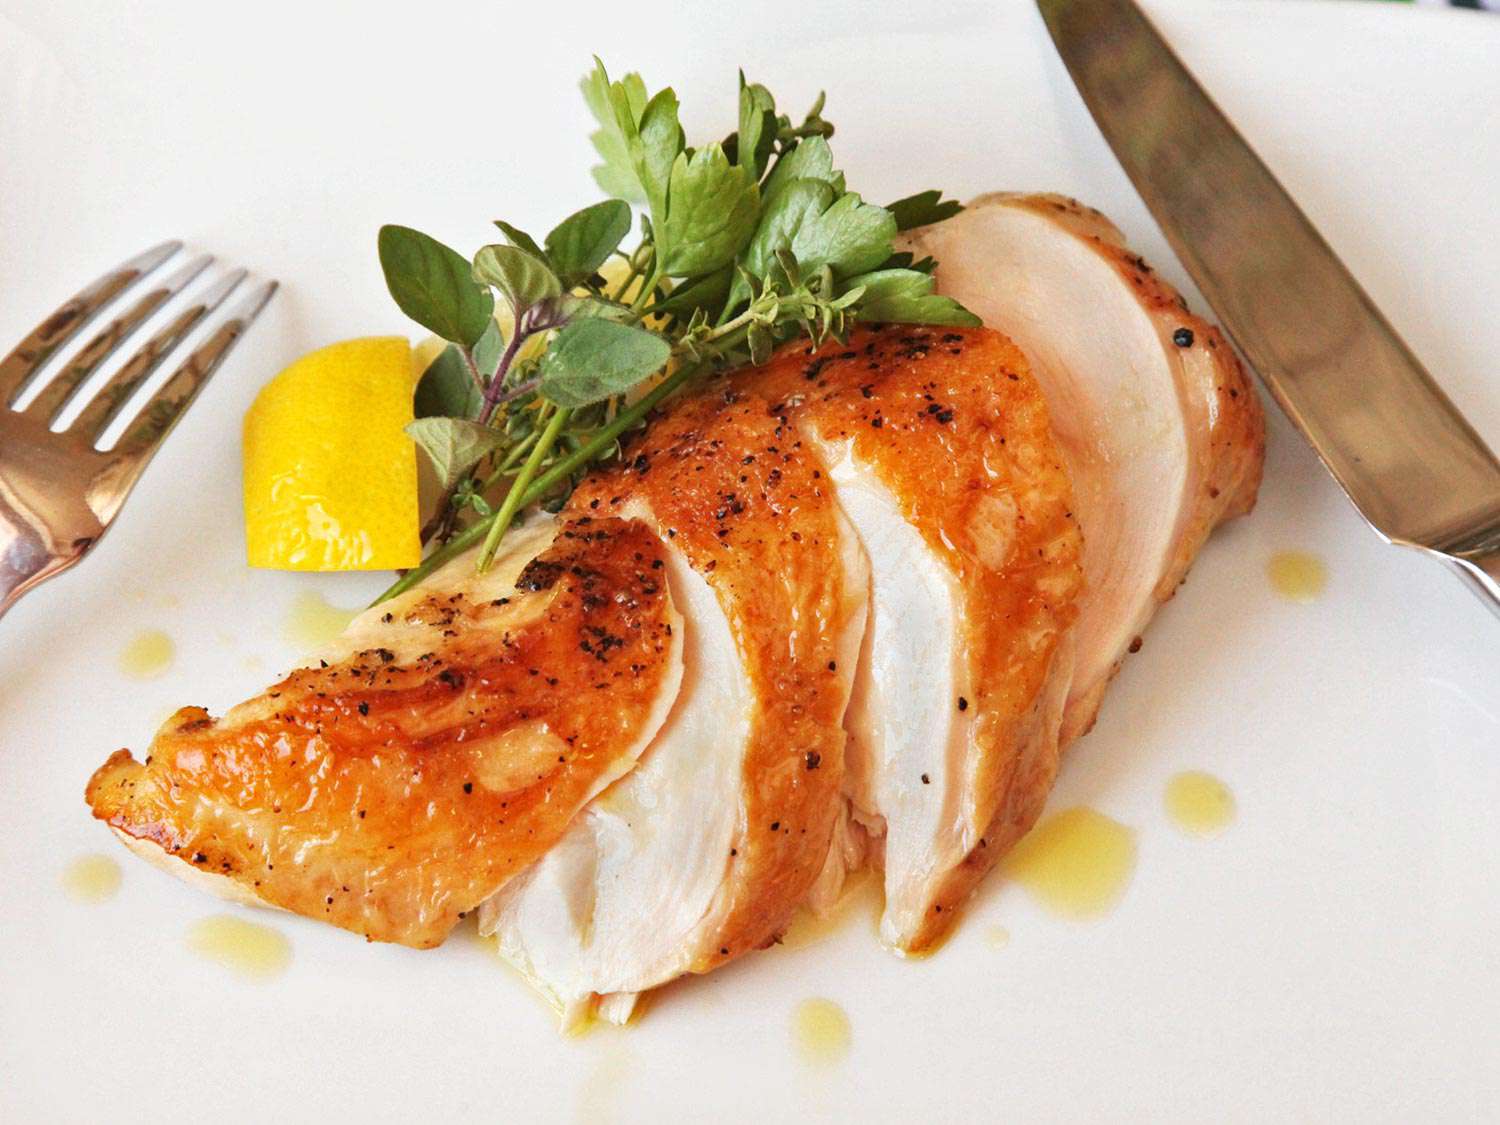 What temperature should I sous vide boneless skinless chicken breast?